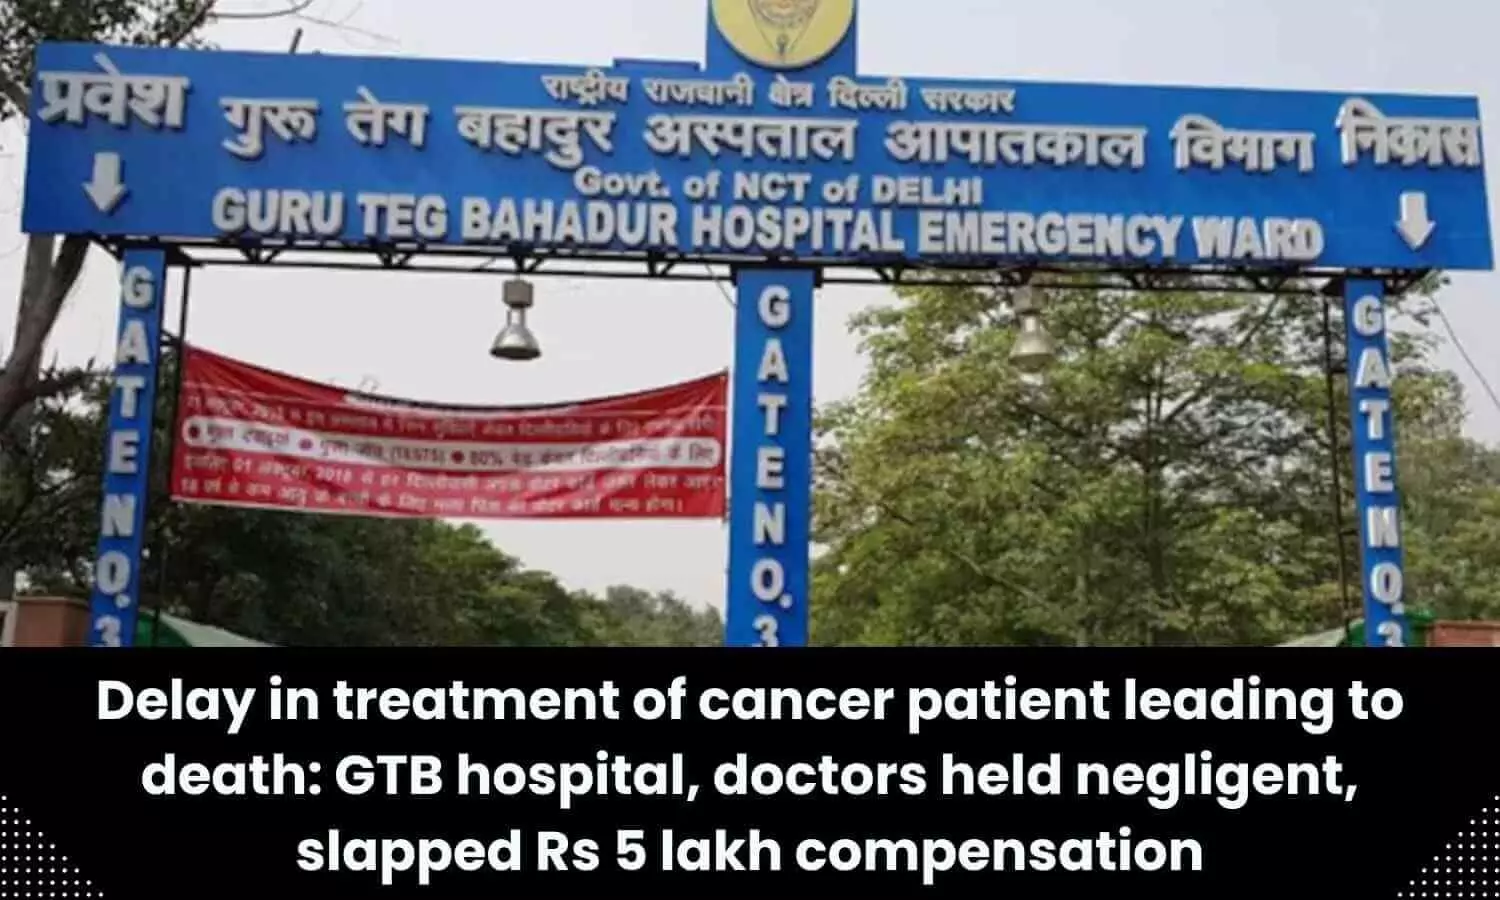 Delay in treatment of cancer patient leading to death: GTB hospital, doctors held negligent, slapped Rs 5 lakh compensation